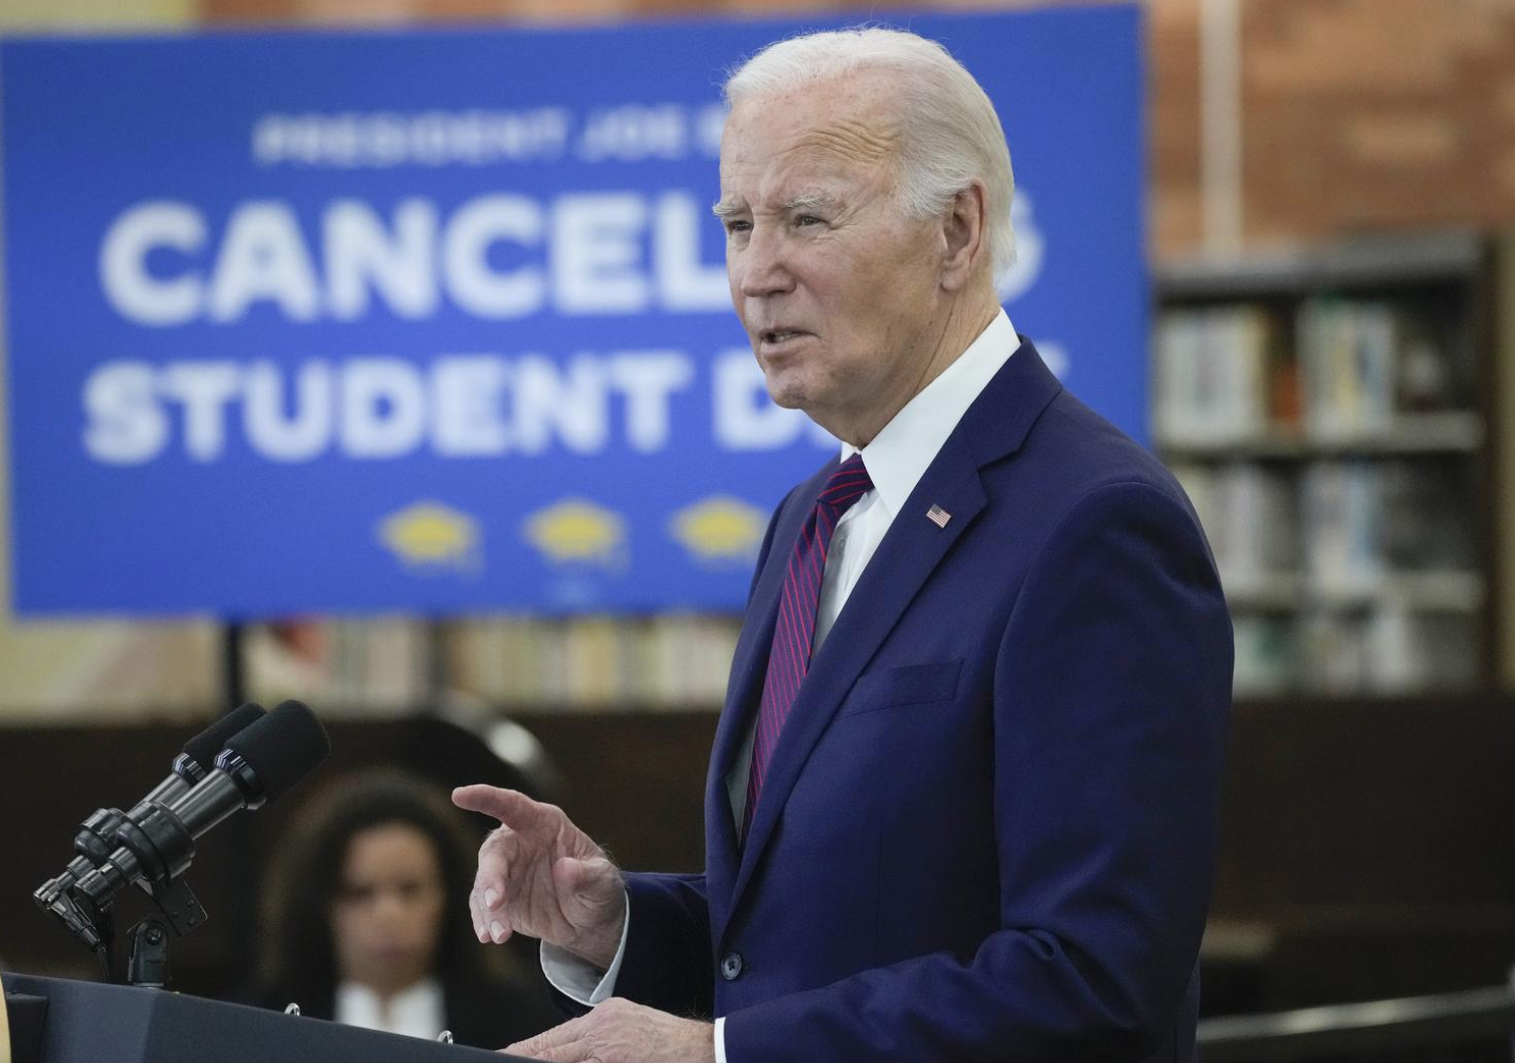 Biden’s student loan work gets tepid reviews — even among those with debt